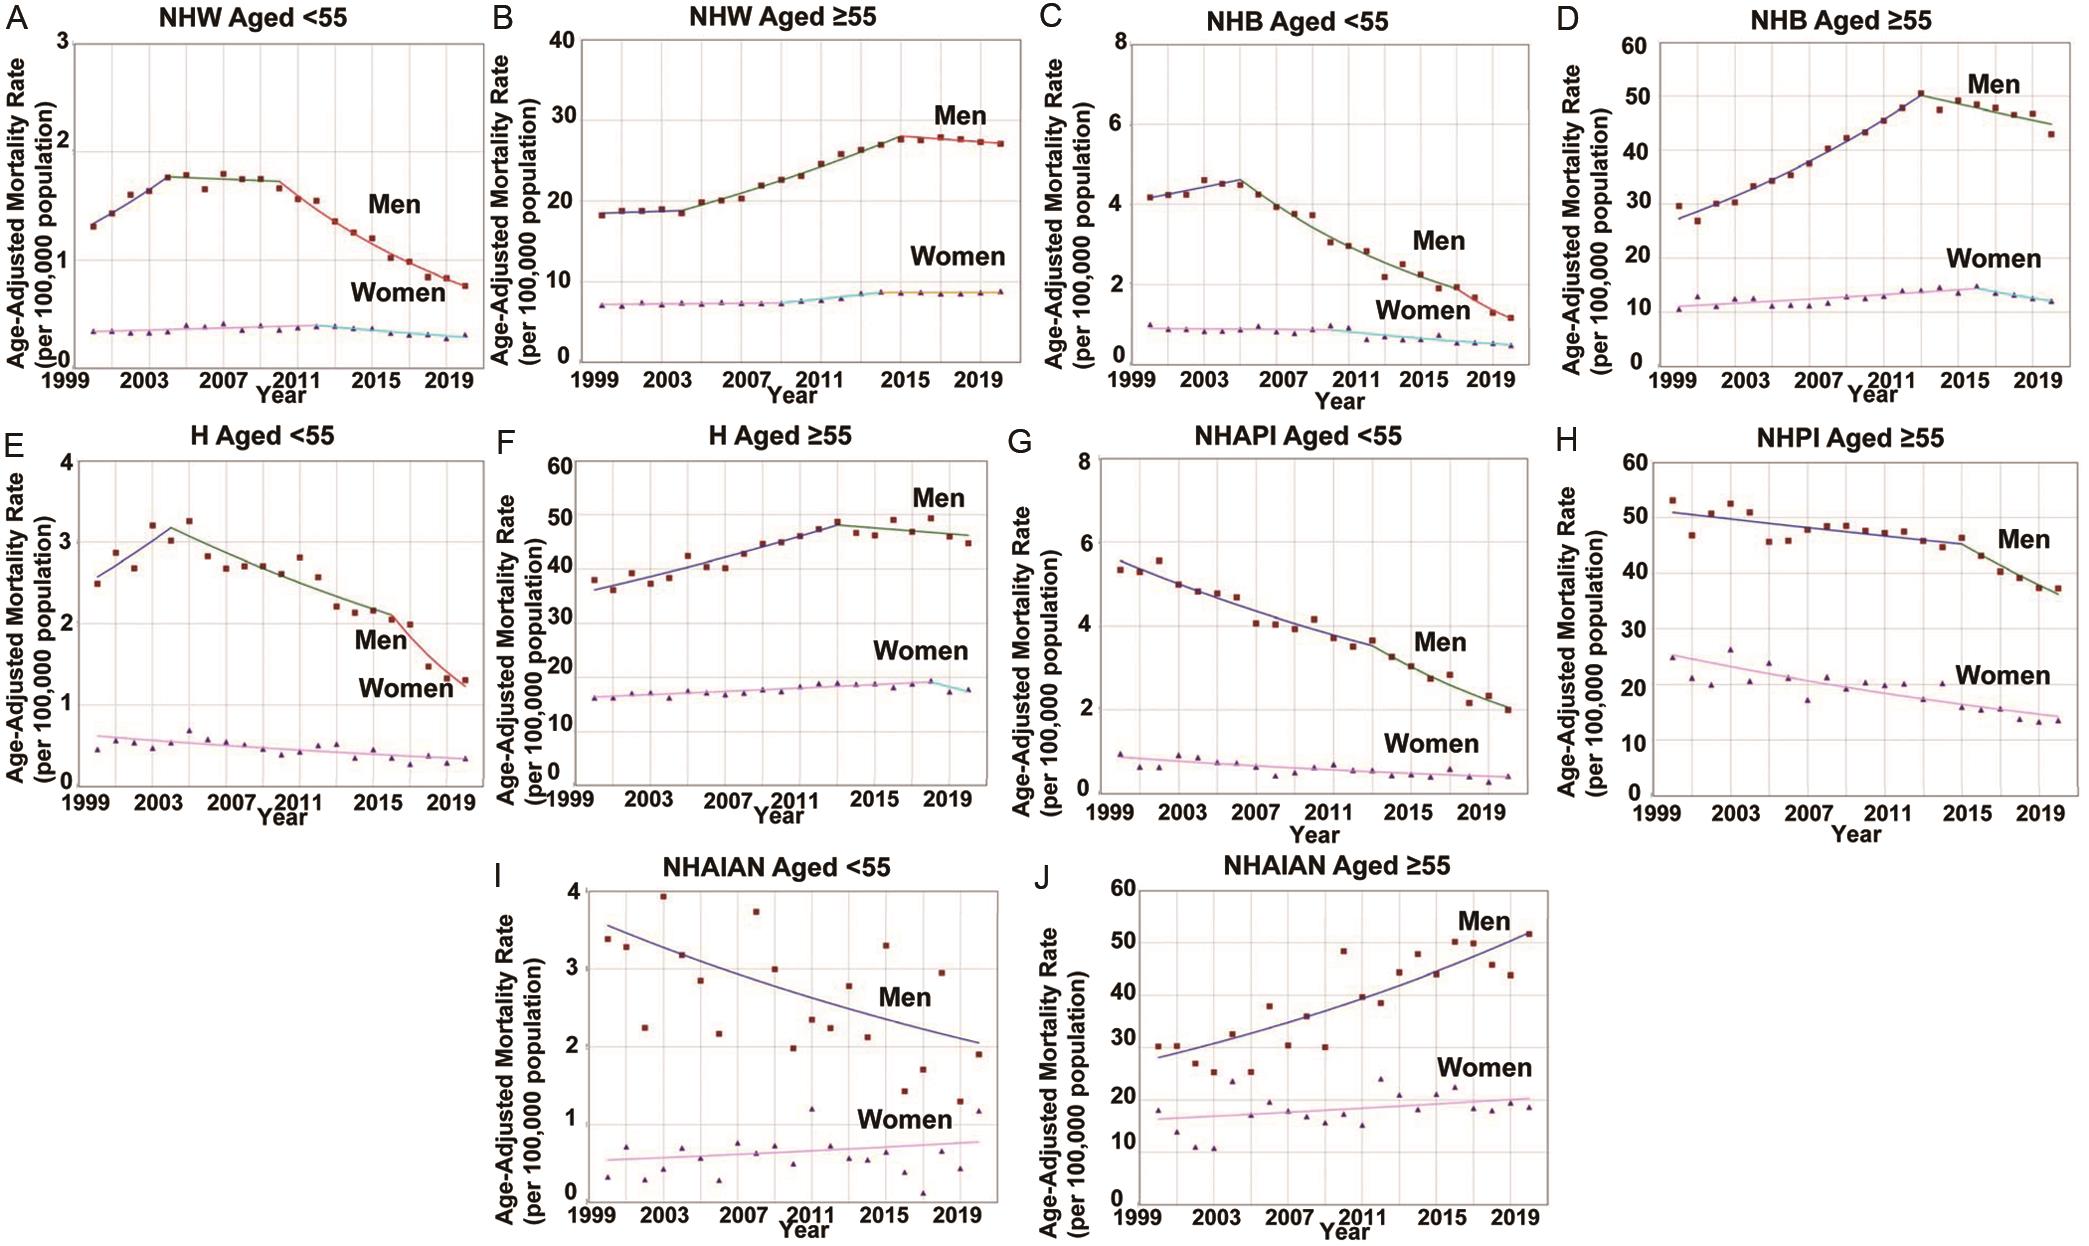 Sex-specific trends and age-adjusted mortality rates per 100,000 population for Hepatocellular Carcinoma (HCC) among different age and racial/ethnic groups.